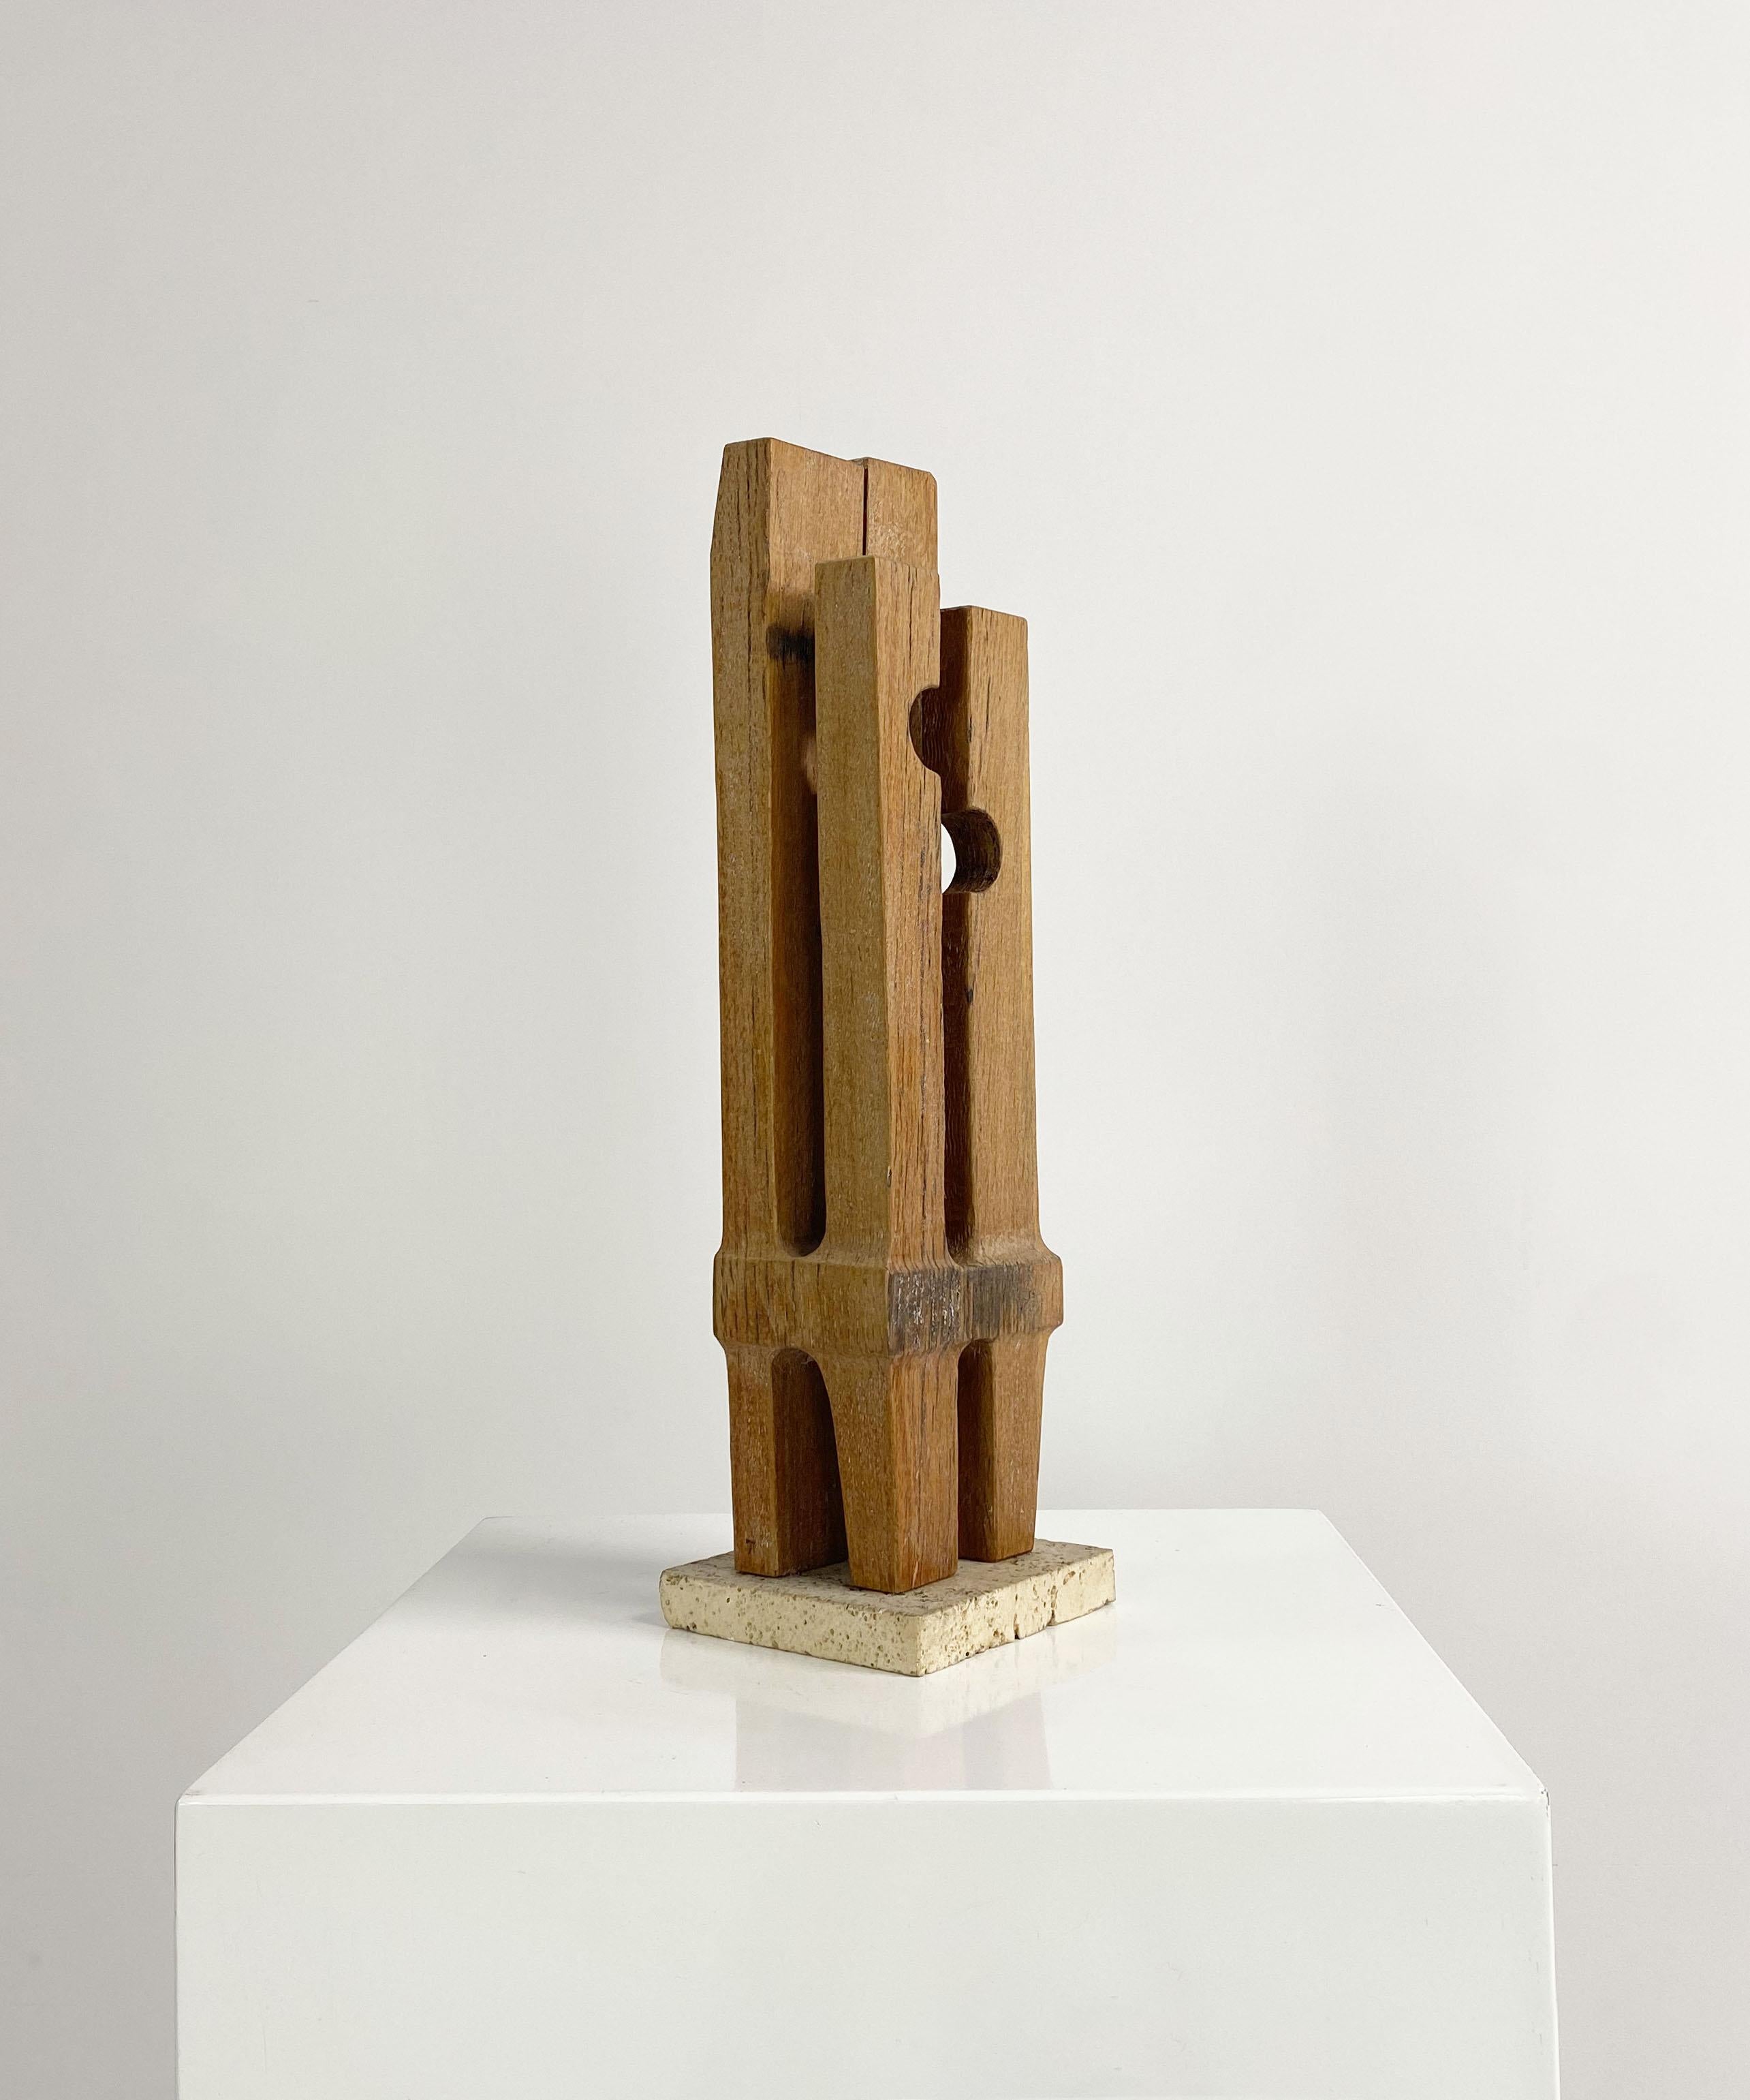 Abstract wooden sculpture by Gloucestershire born sculptor, painter and teacher, Ronald Pope (1920 - 1997). A prize winning stone carver, Pope lectured at the University of Nottingham and engaged in a number of architectural commissions in the